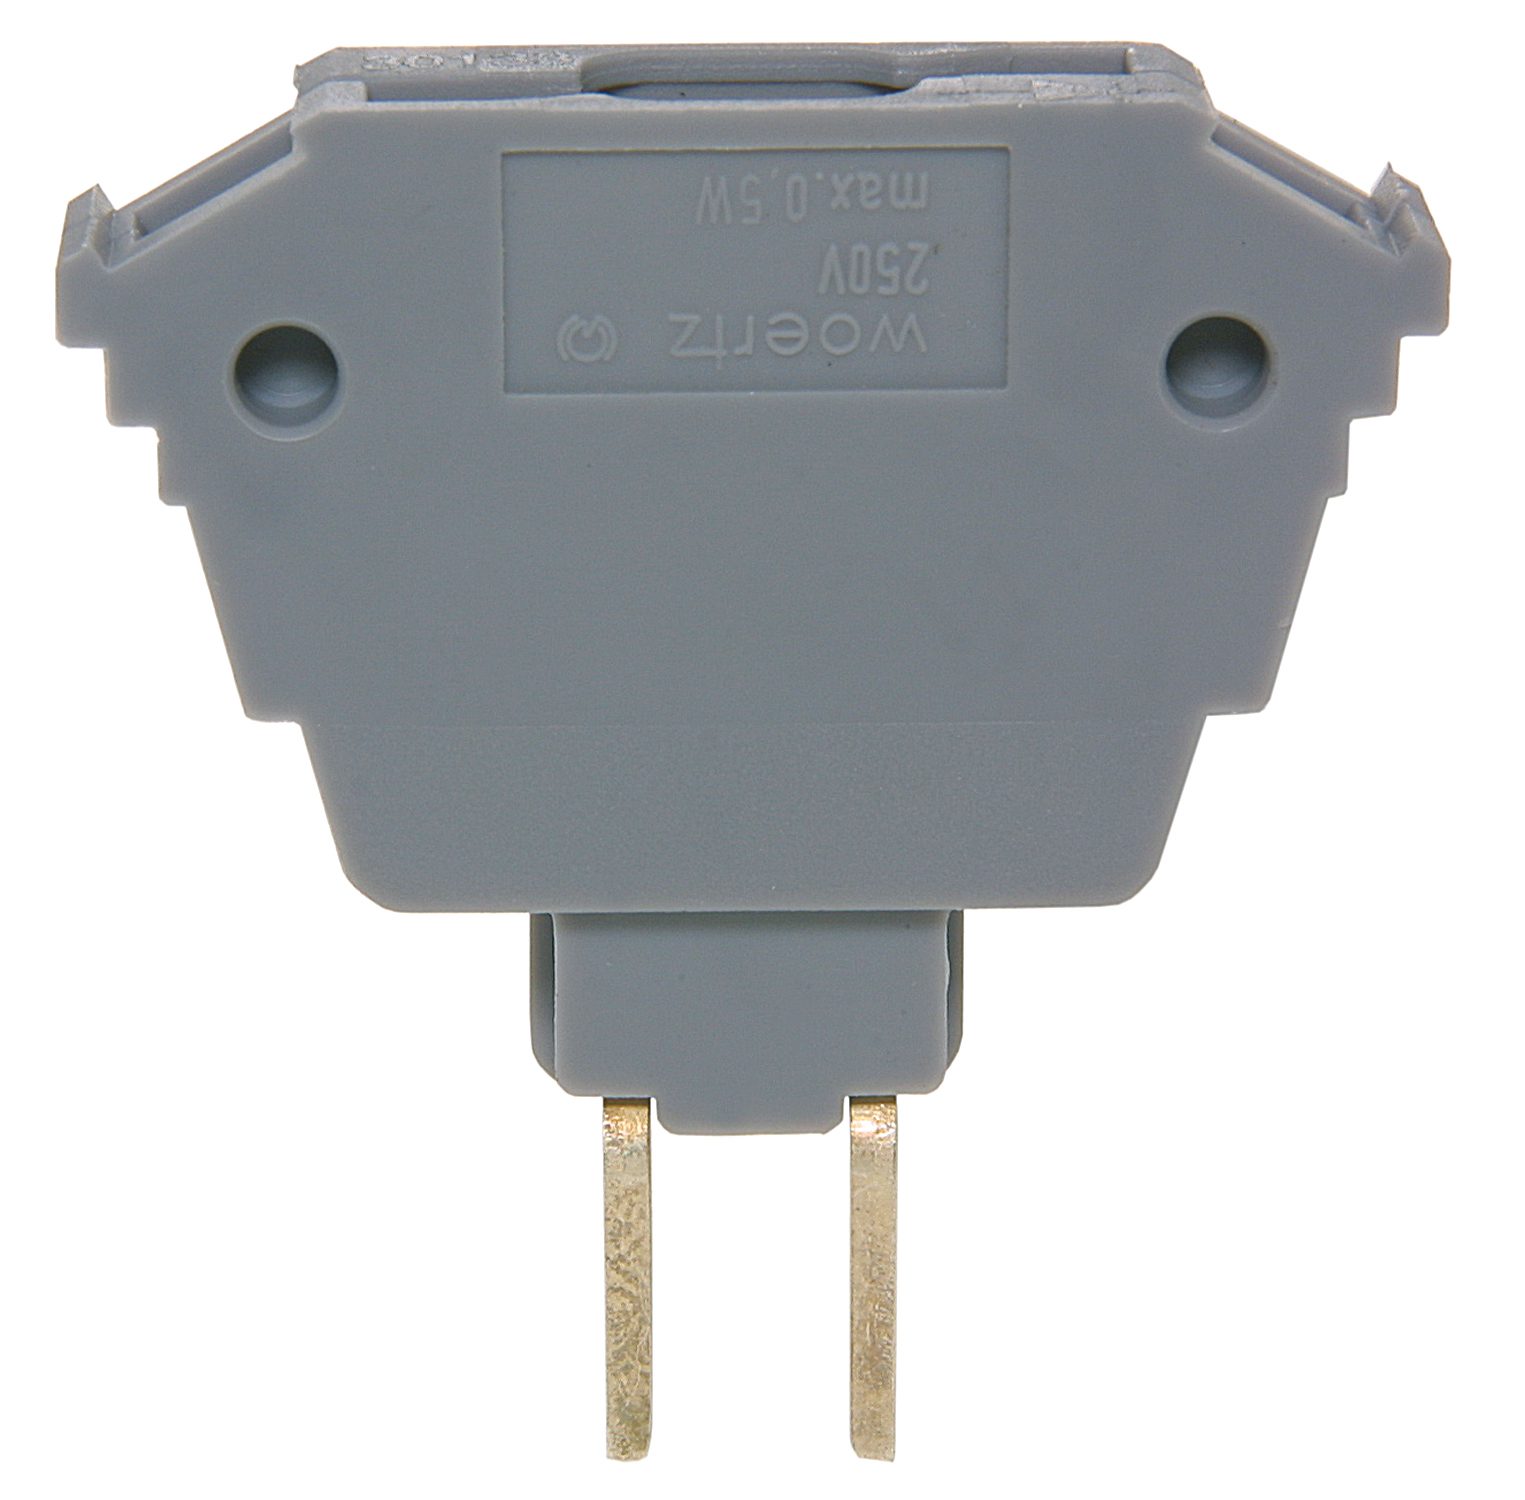 Diode plug with rectifier diode black